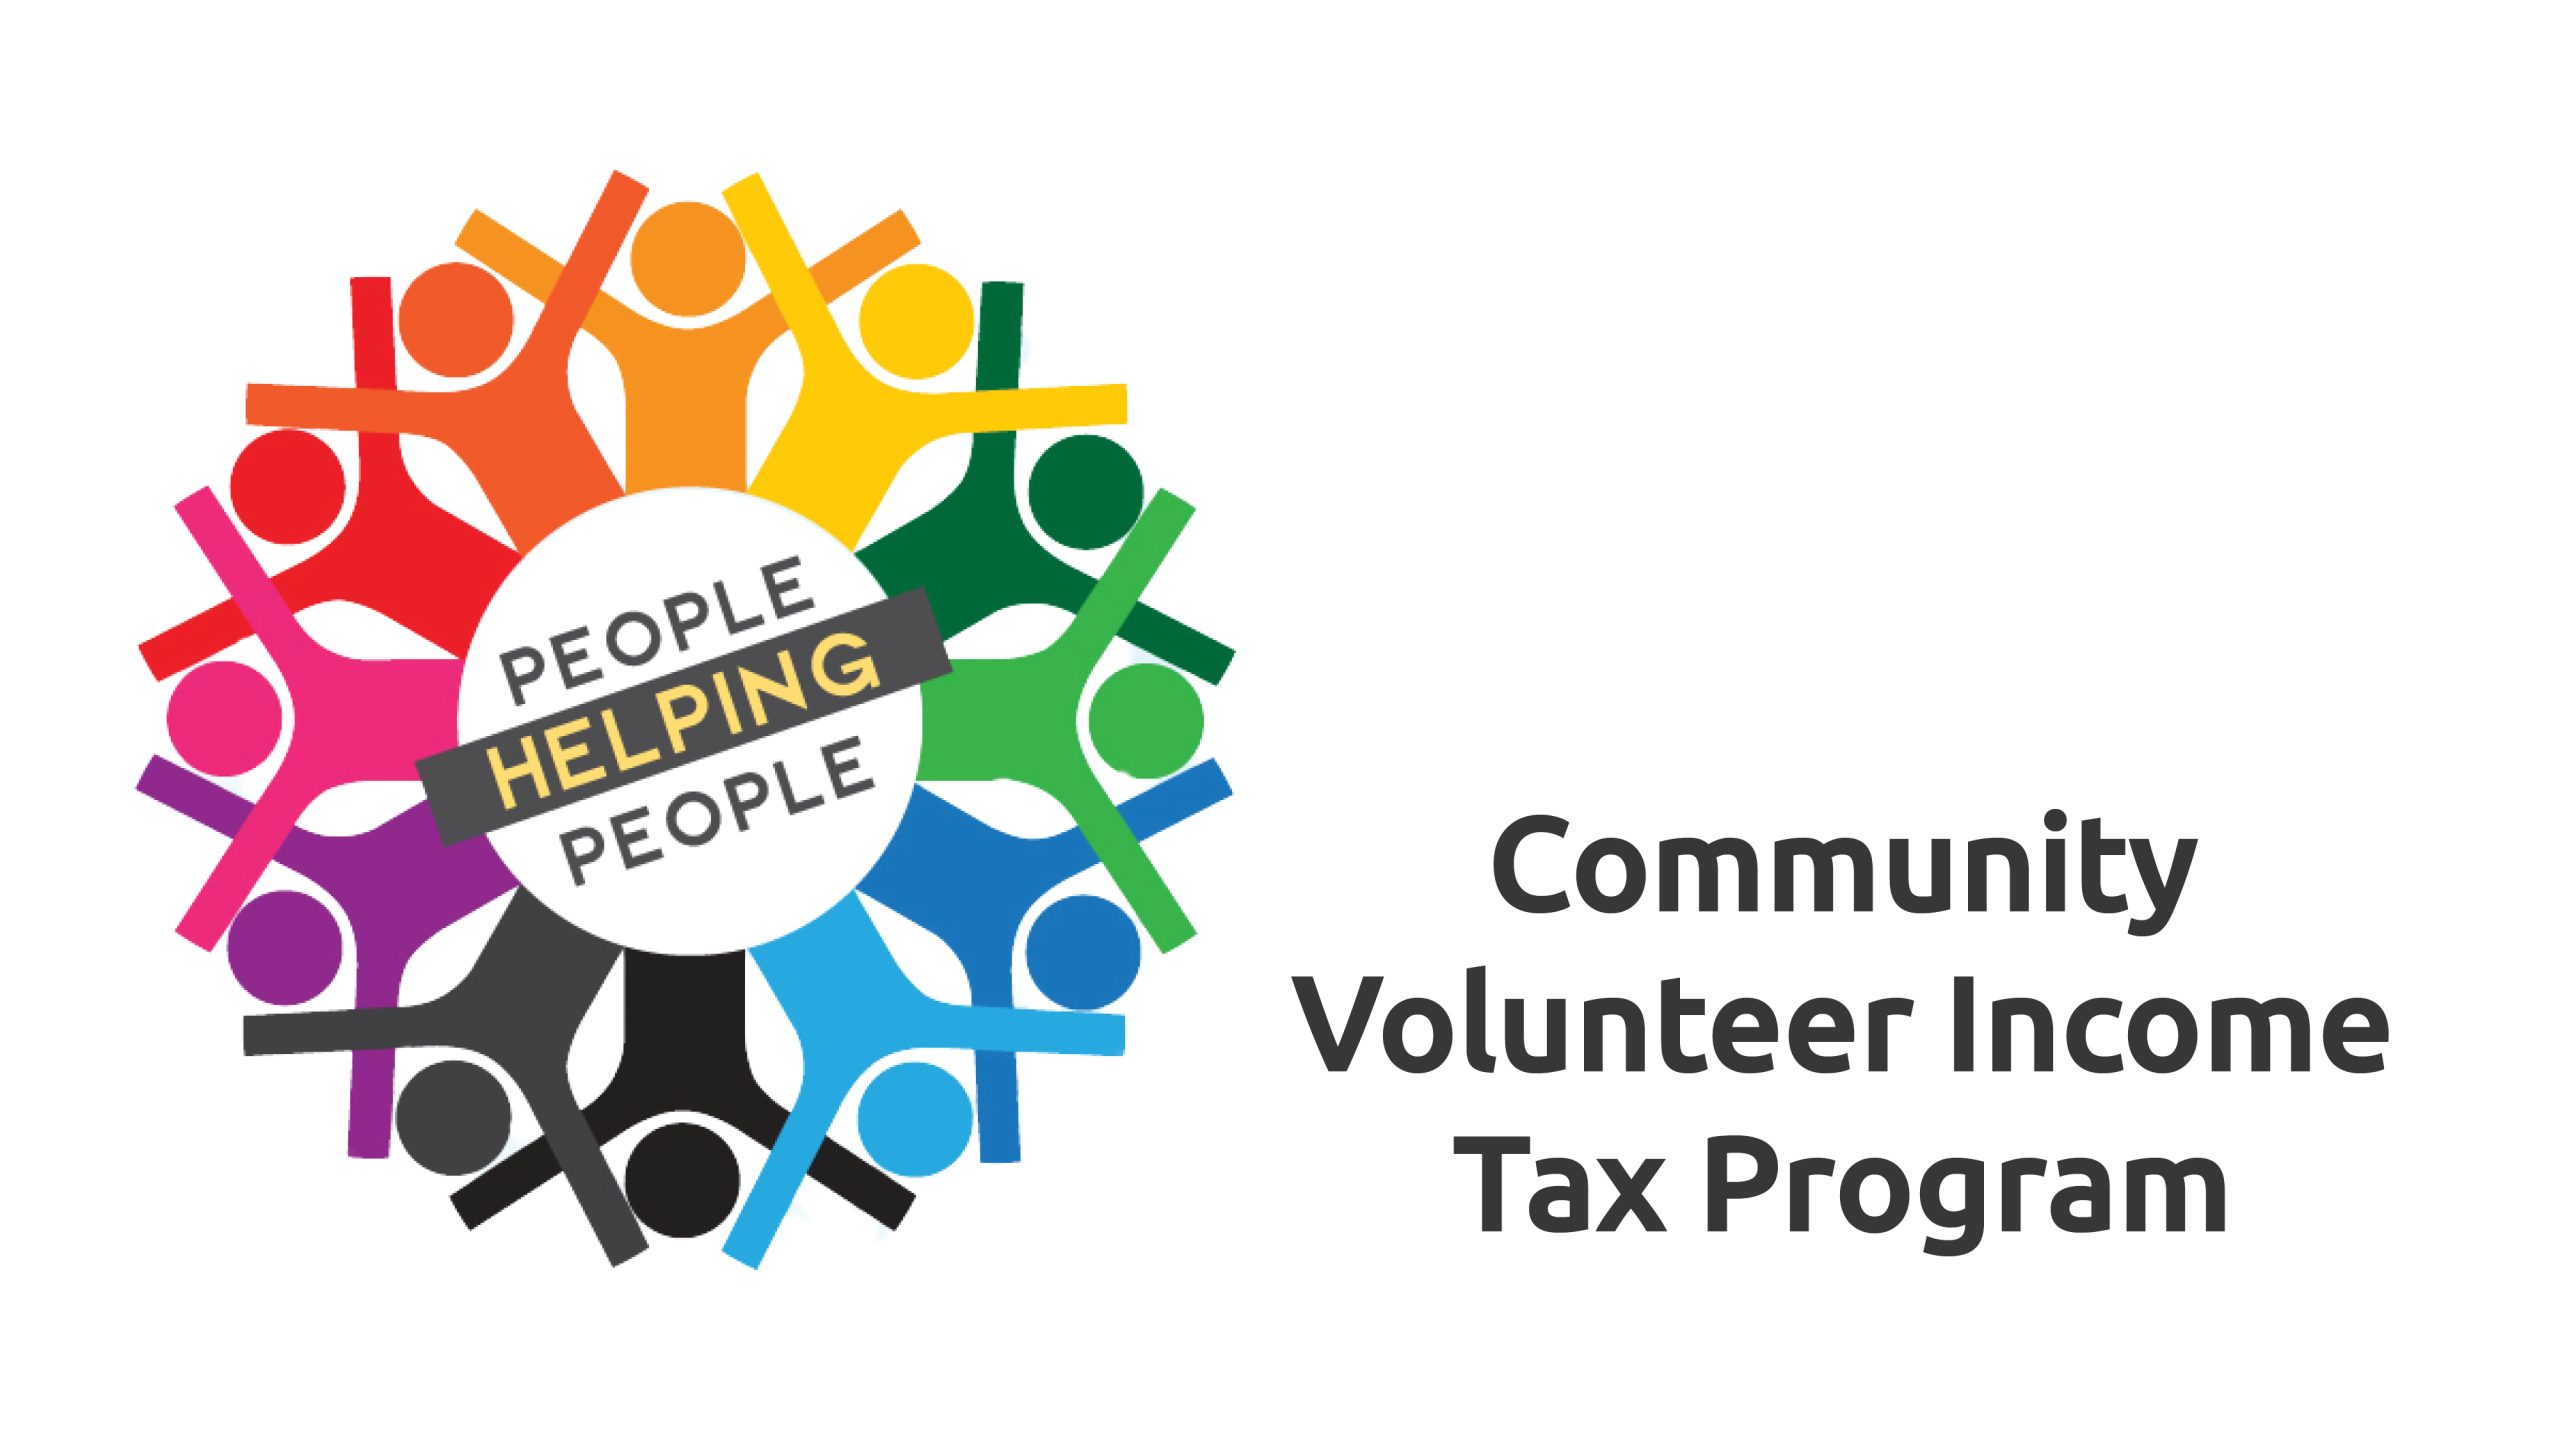 Illustration of people holding hands in a circle with text that reads People Helping People and Community Volunteer Income Tax Program